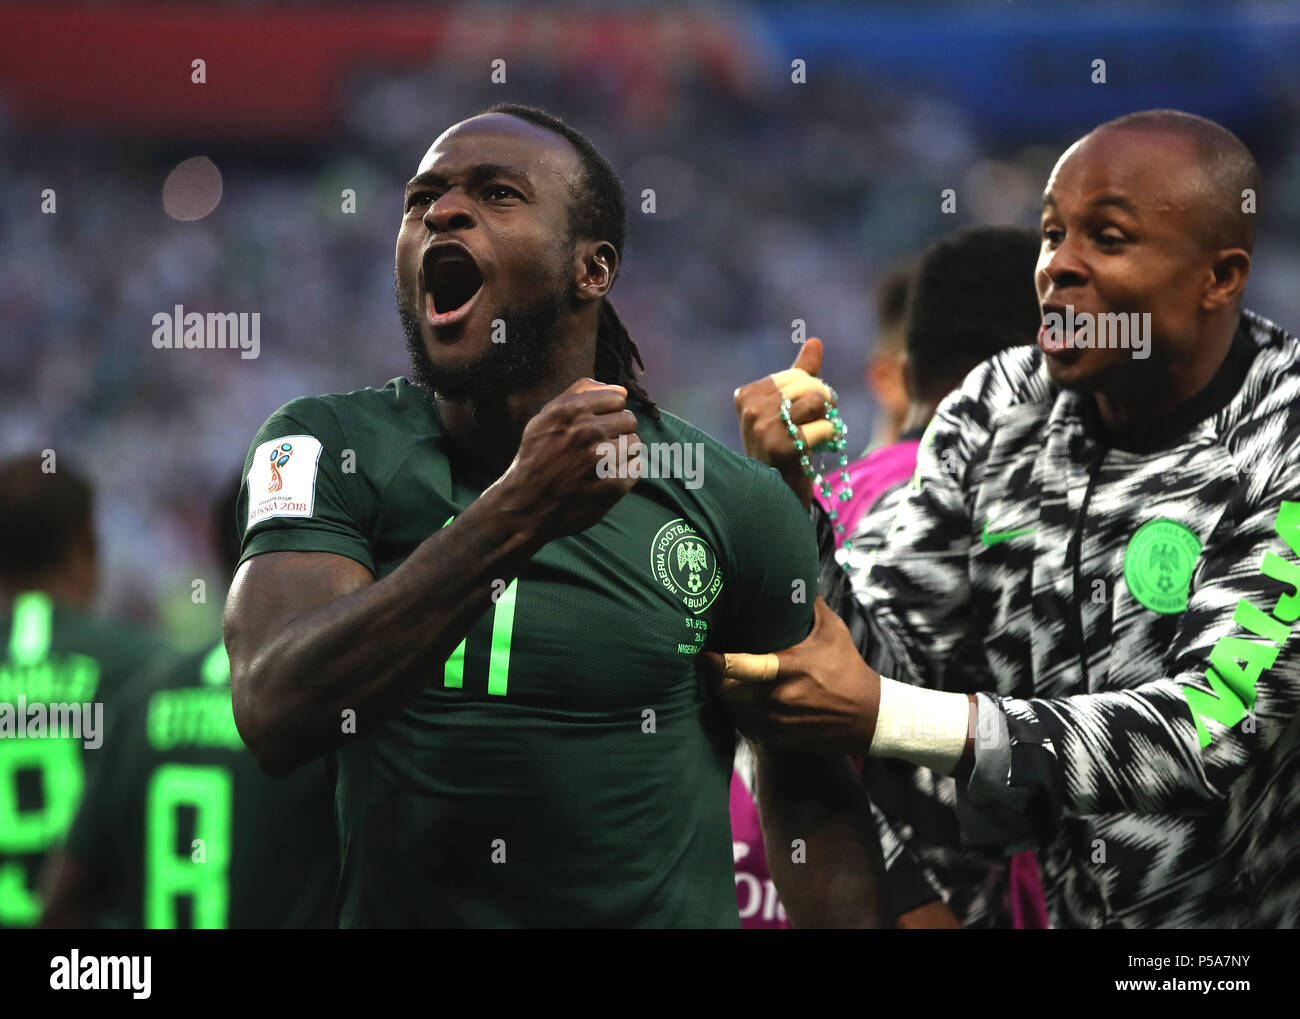 Saint Petersburg, Russia. 26th June, 2018. Victor Moses (L) of Nigeria celebrates scoring during the 2018 FIFA World Cup Group D match between Nigeria and Argentina in Saint Petersburg, Russia, June 26, 2018. Argentina won 2-1 and advanced to the round of 16. Credit: Wu Zhuang/Xinhua/Alamy Live News Stock Photo